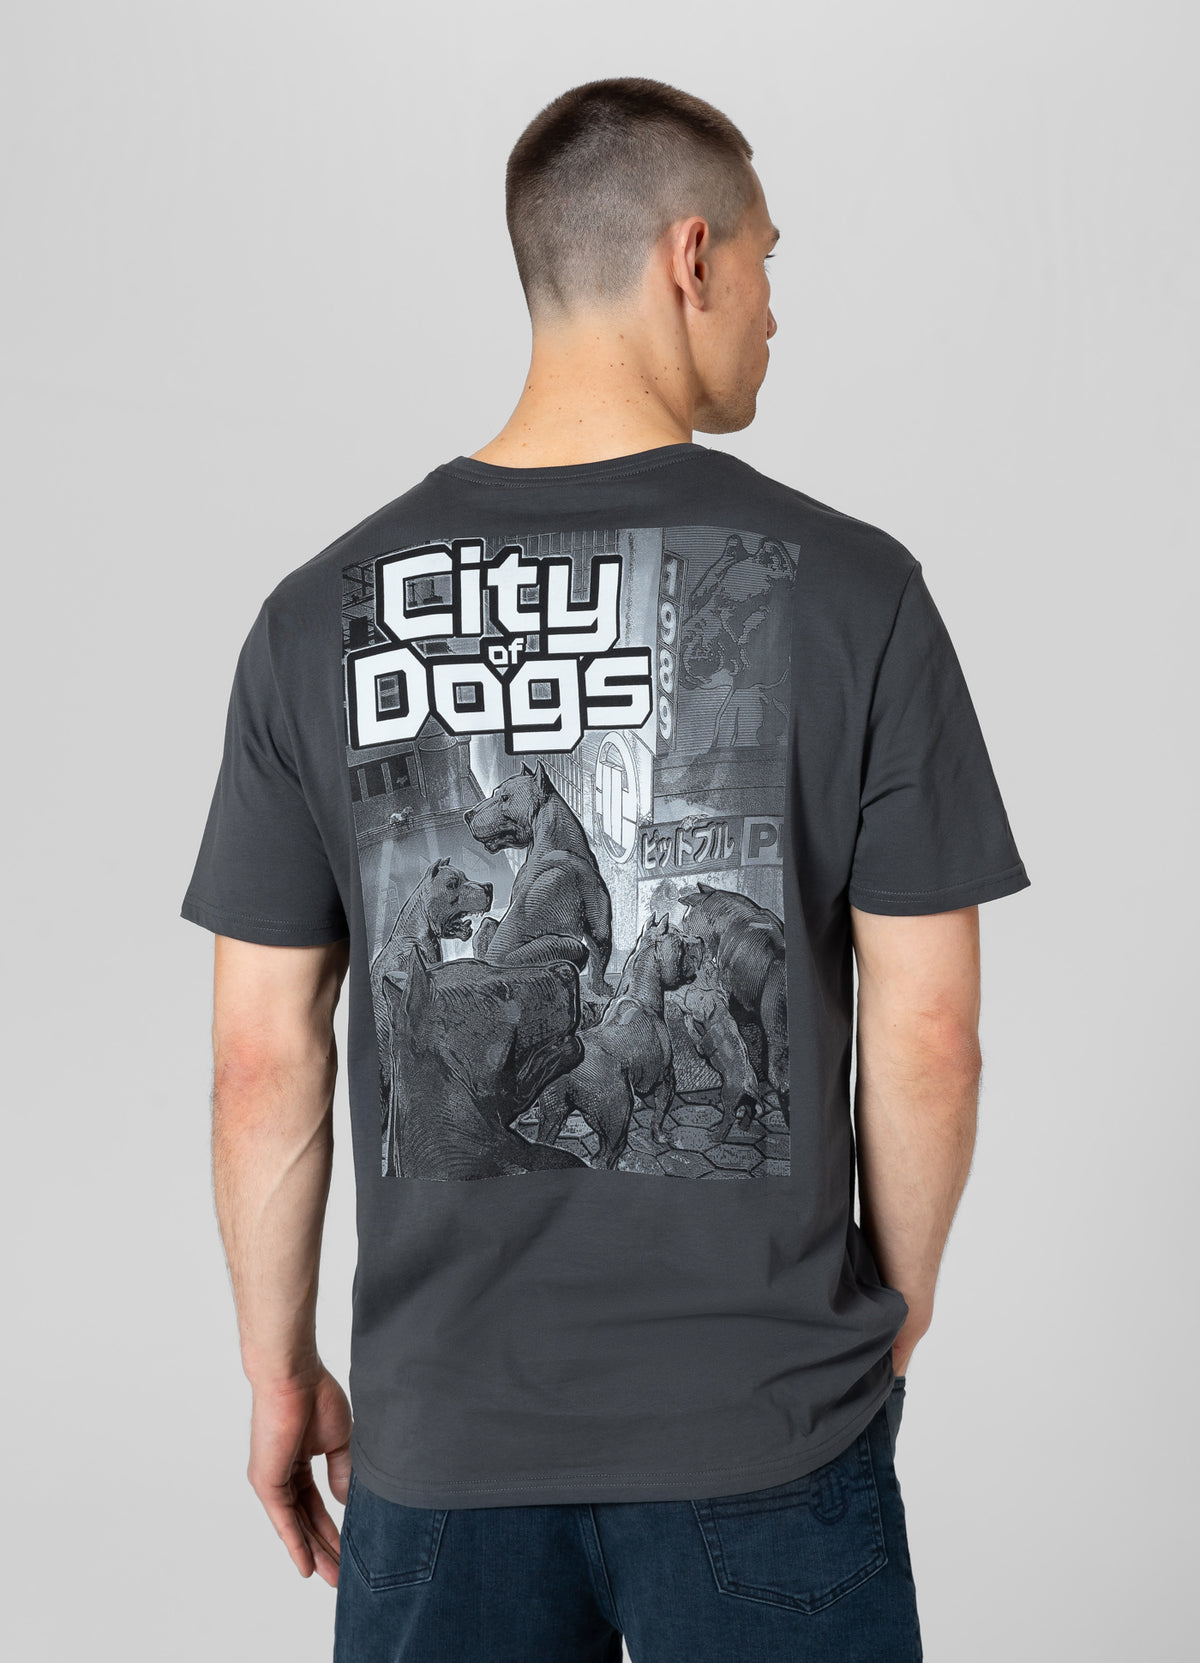 CITY OF DOGS Graphite T-shirt